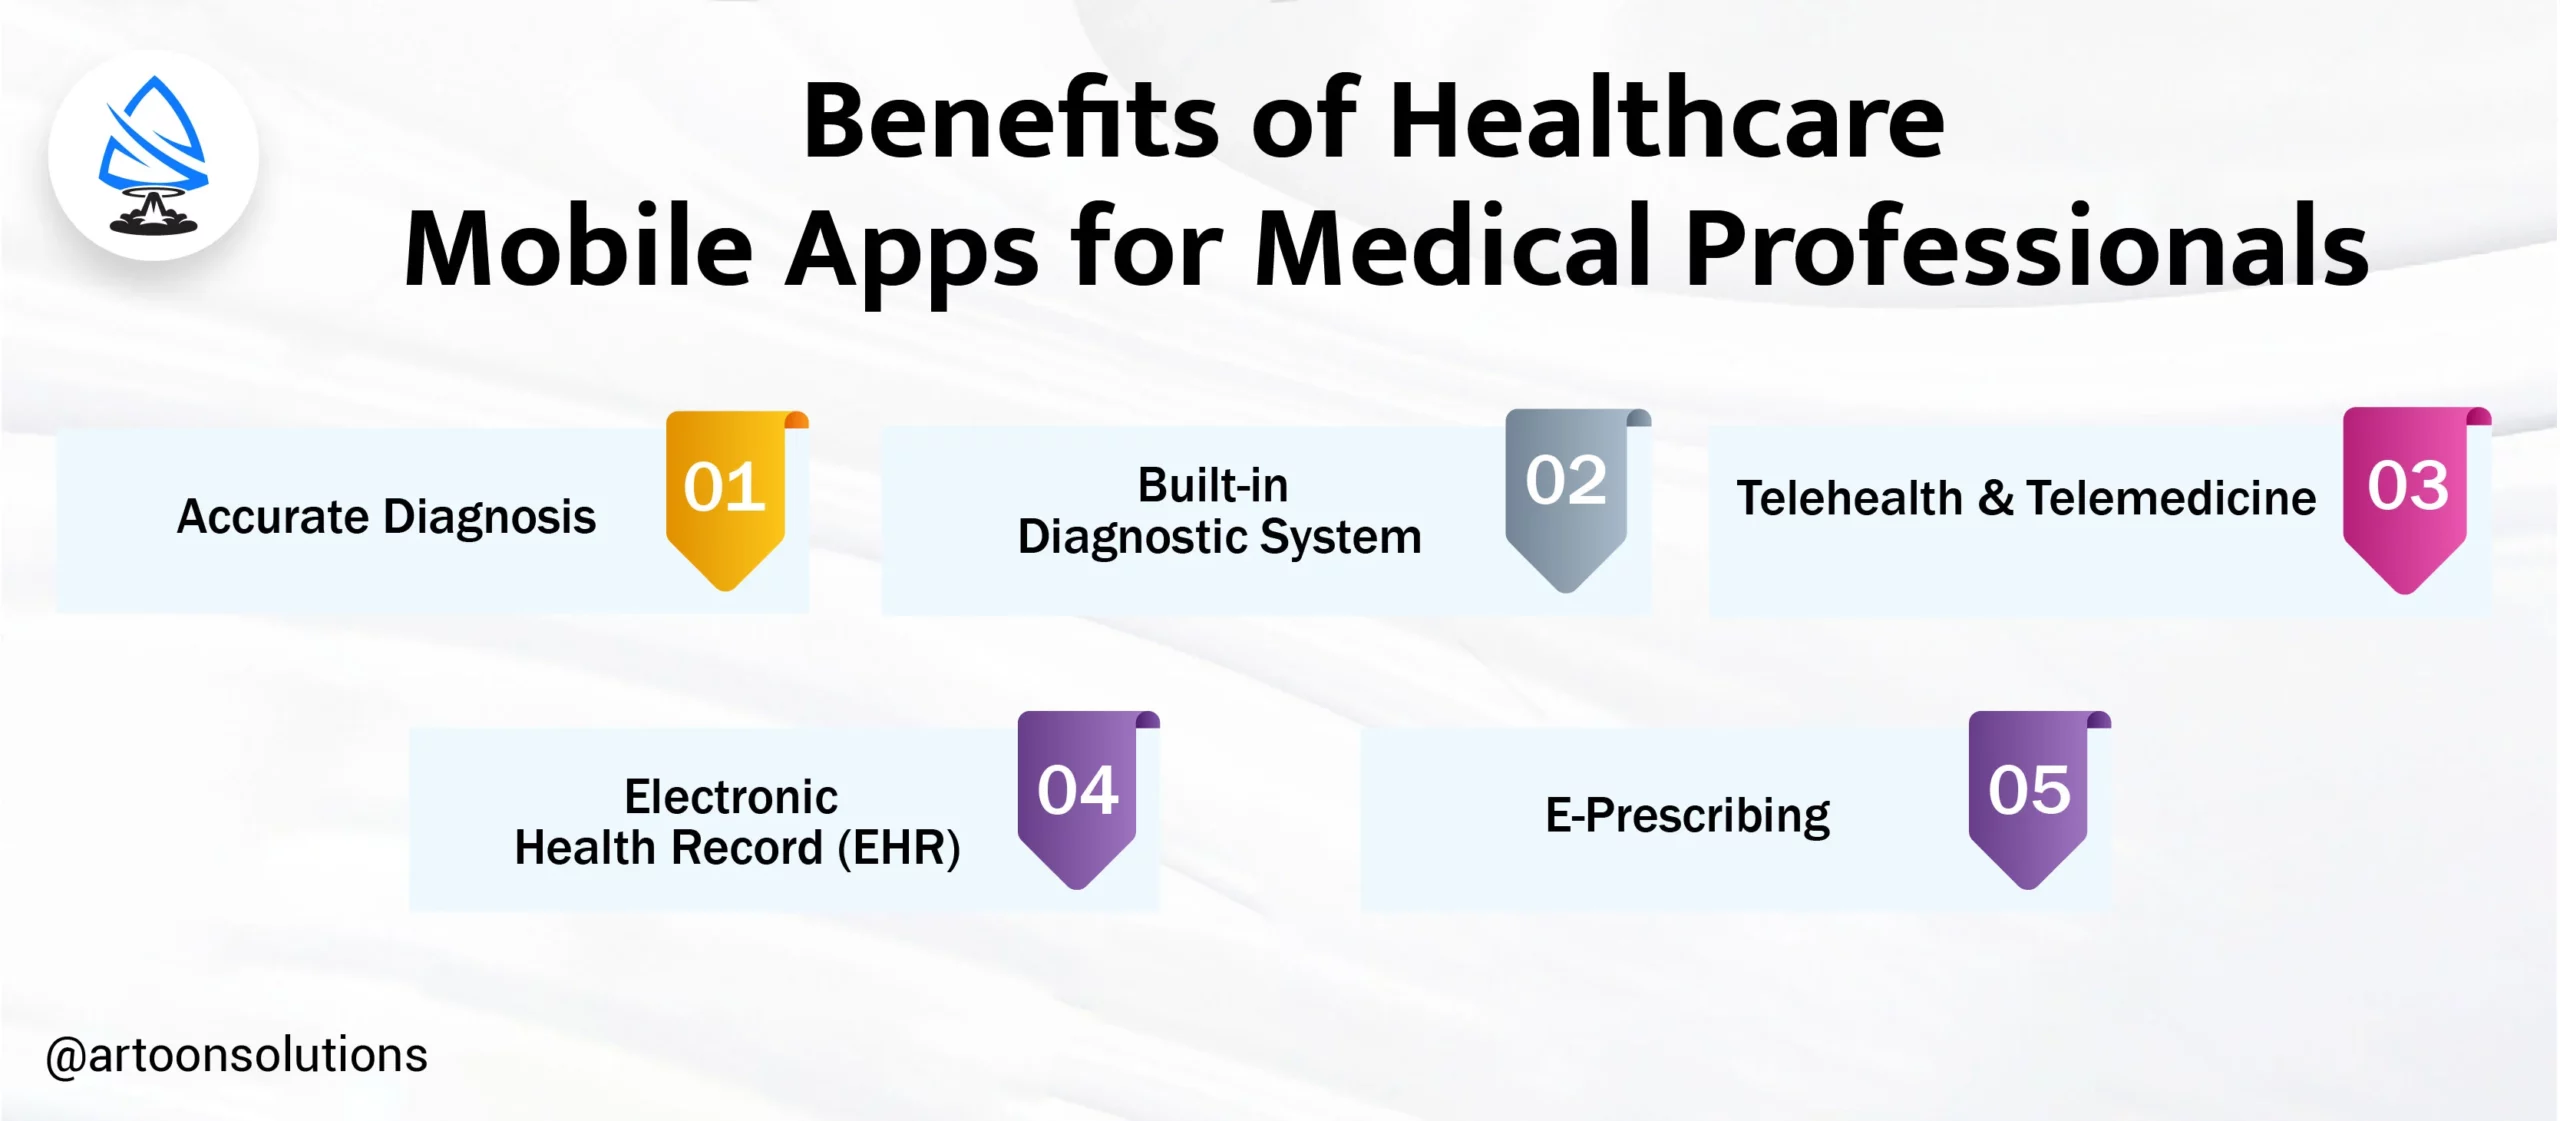 Benefits of Healthcare Mobile Apps for Medical Professionals